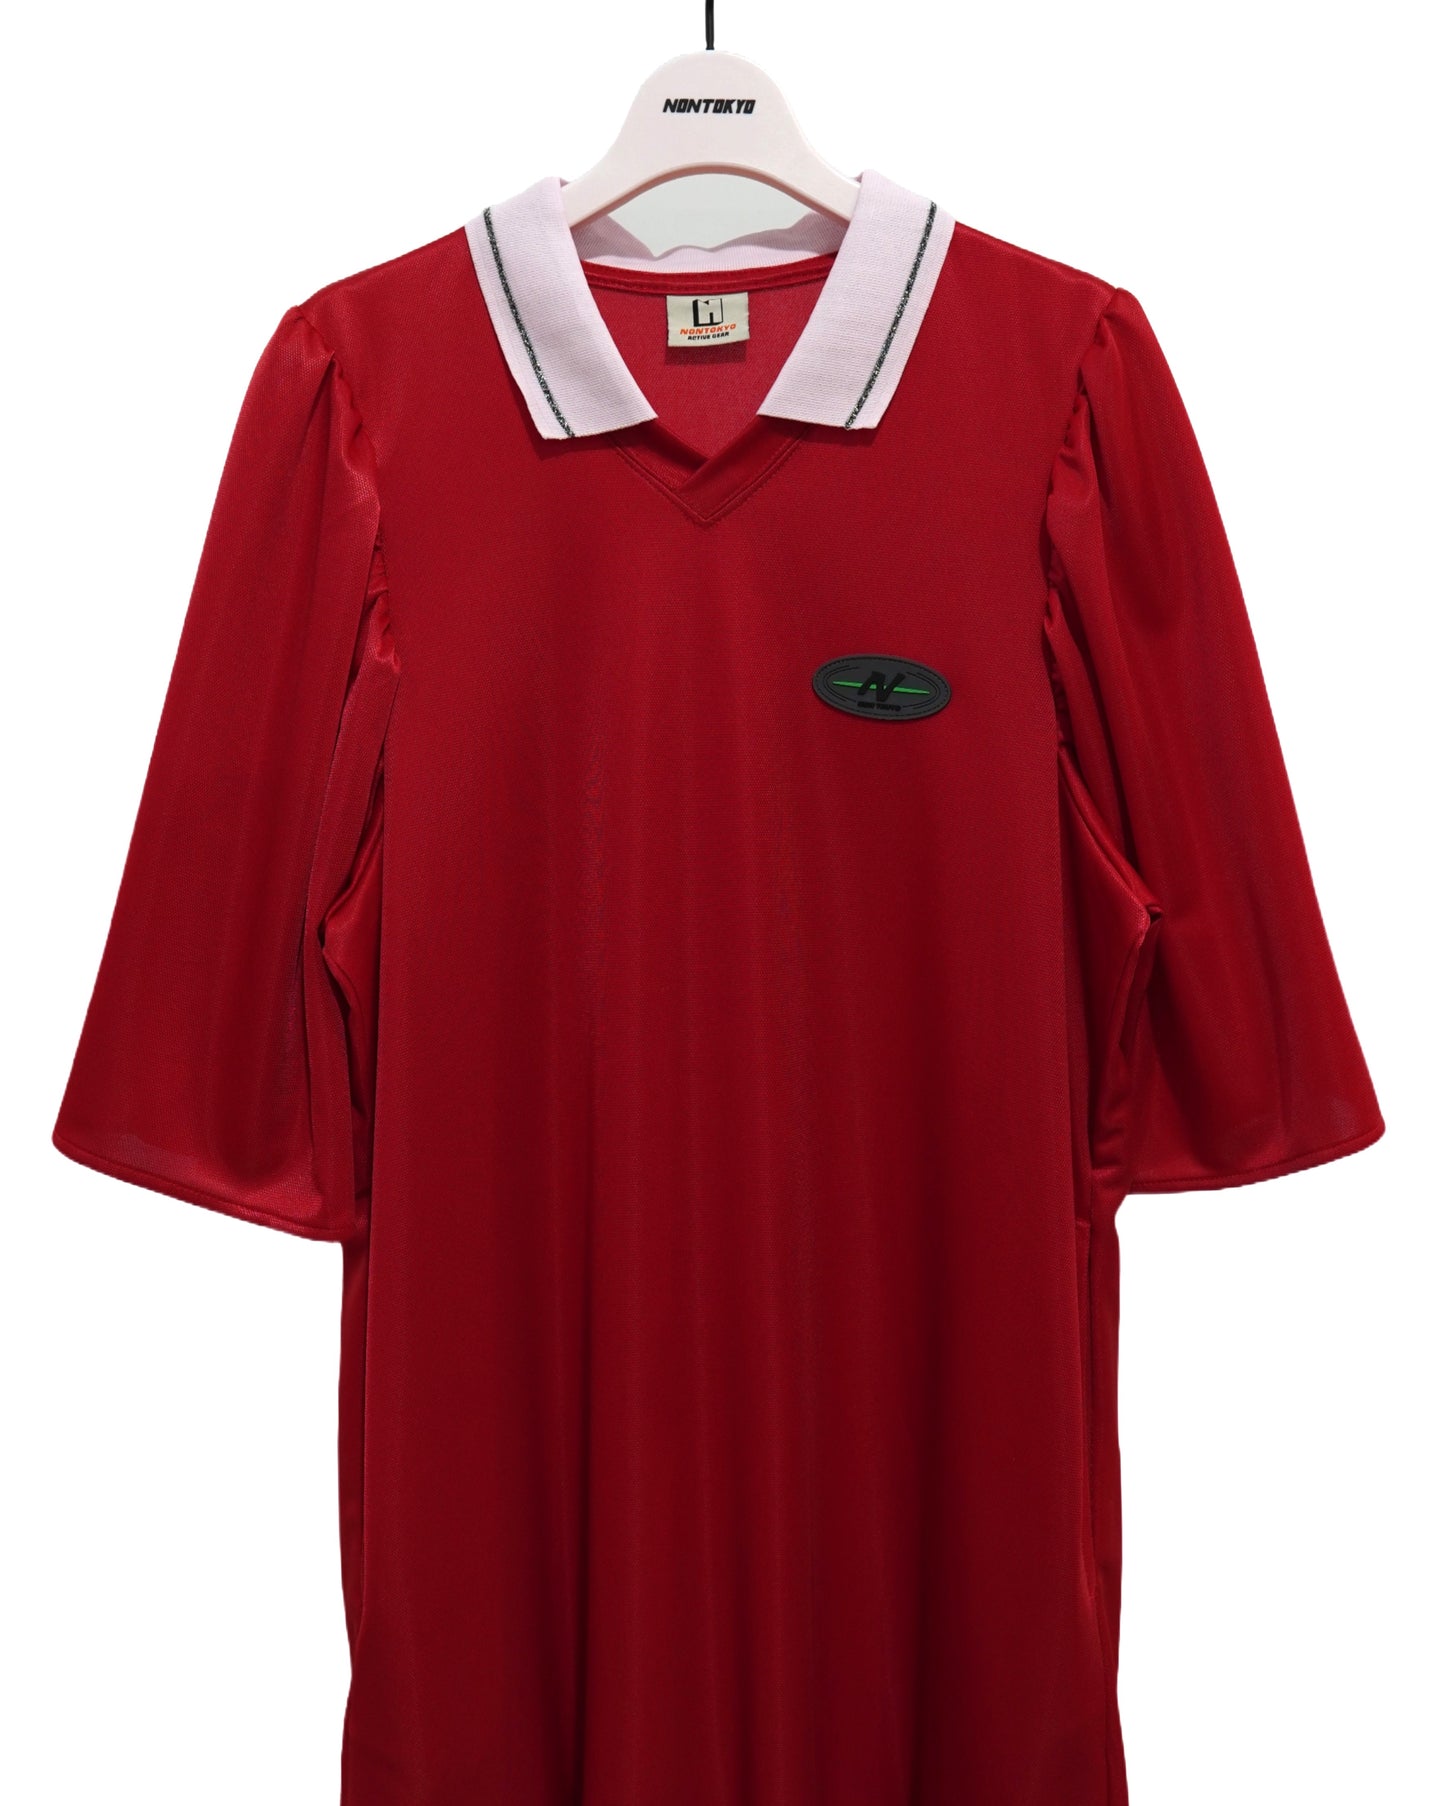 NON TOKYO /  FLARE SLEEVE SOCCER SHIRT ONE-PIECE (RED) / 〈ノントーキョー〉フレアスリーブシアサッカーシャツワンピース (レッド)